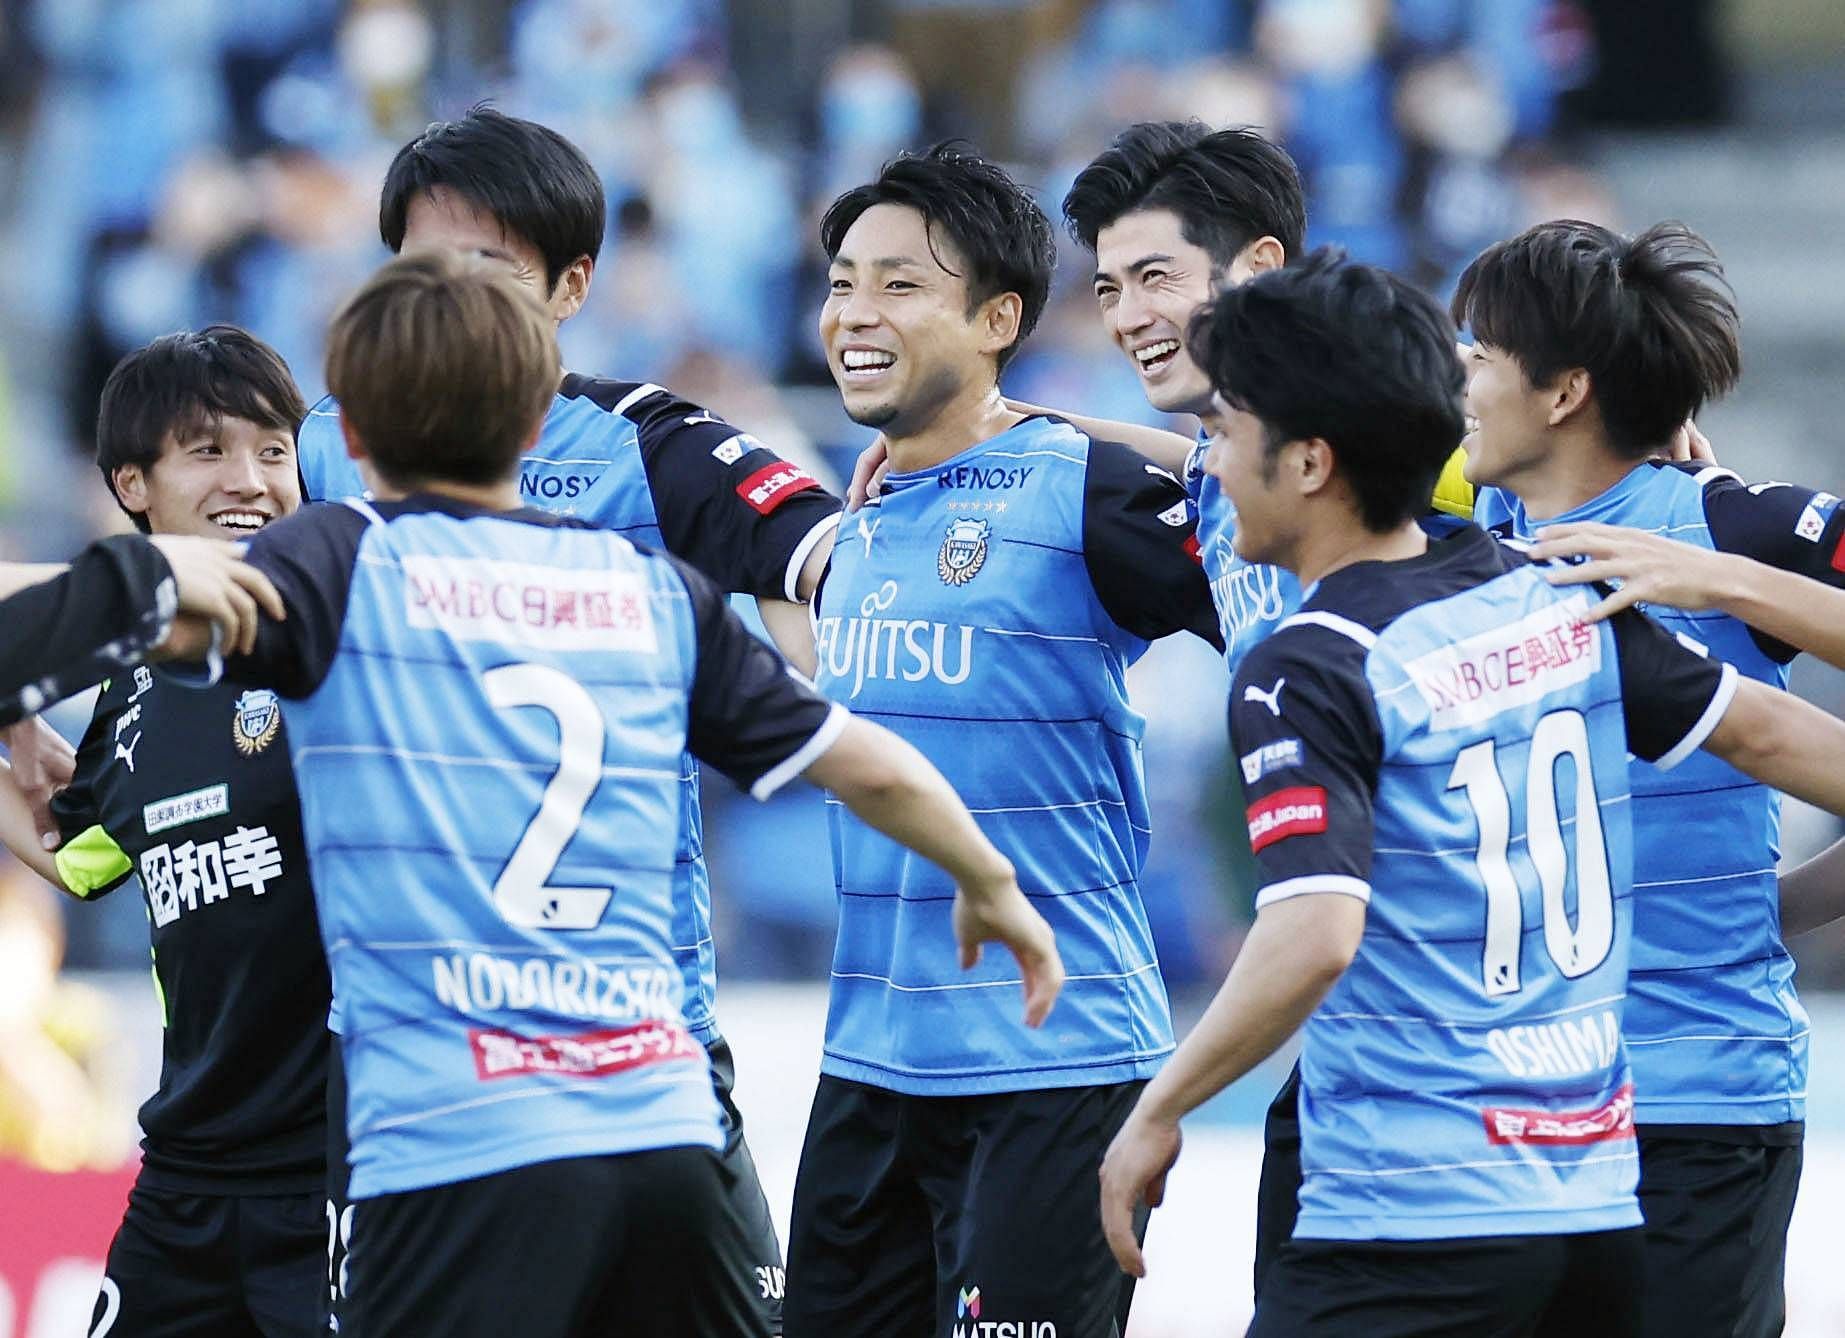 Kawasaki Frontale face Urawa Reds in the Japanese Super Cup final on Saturday